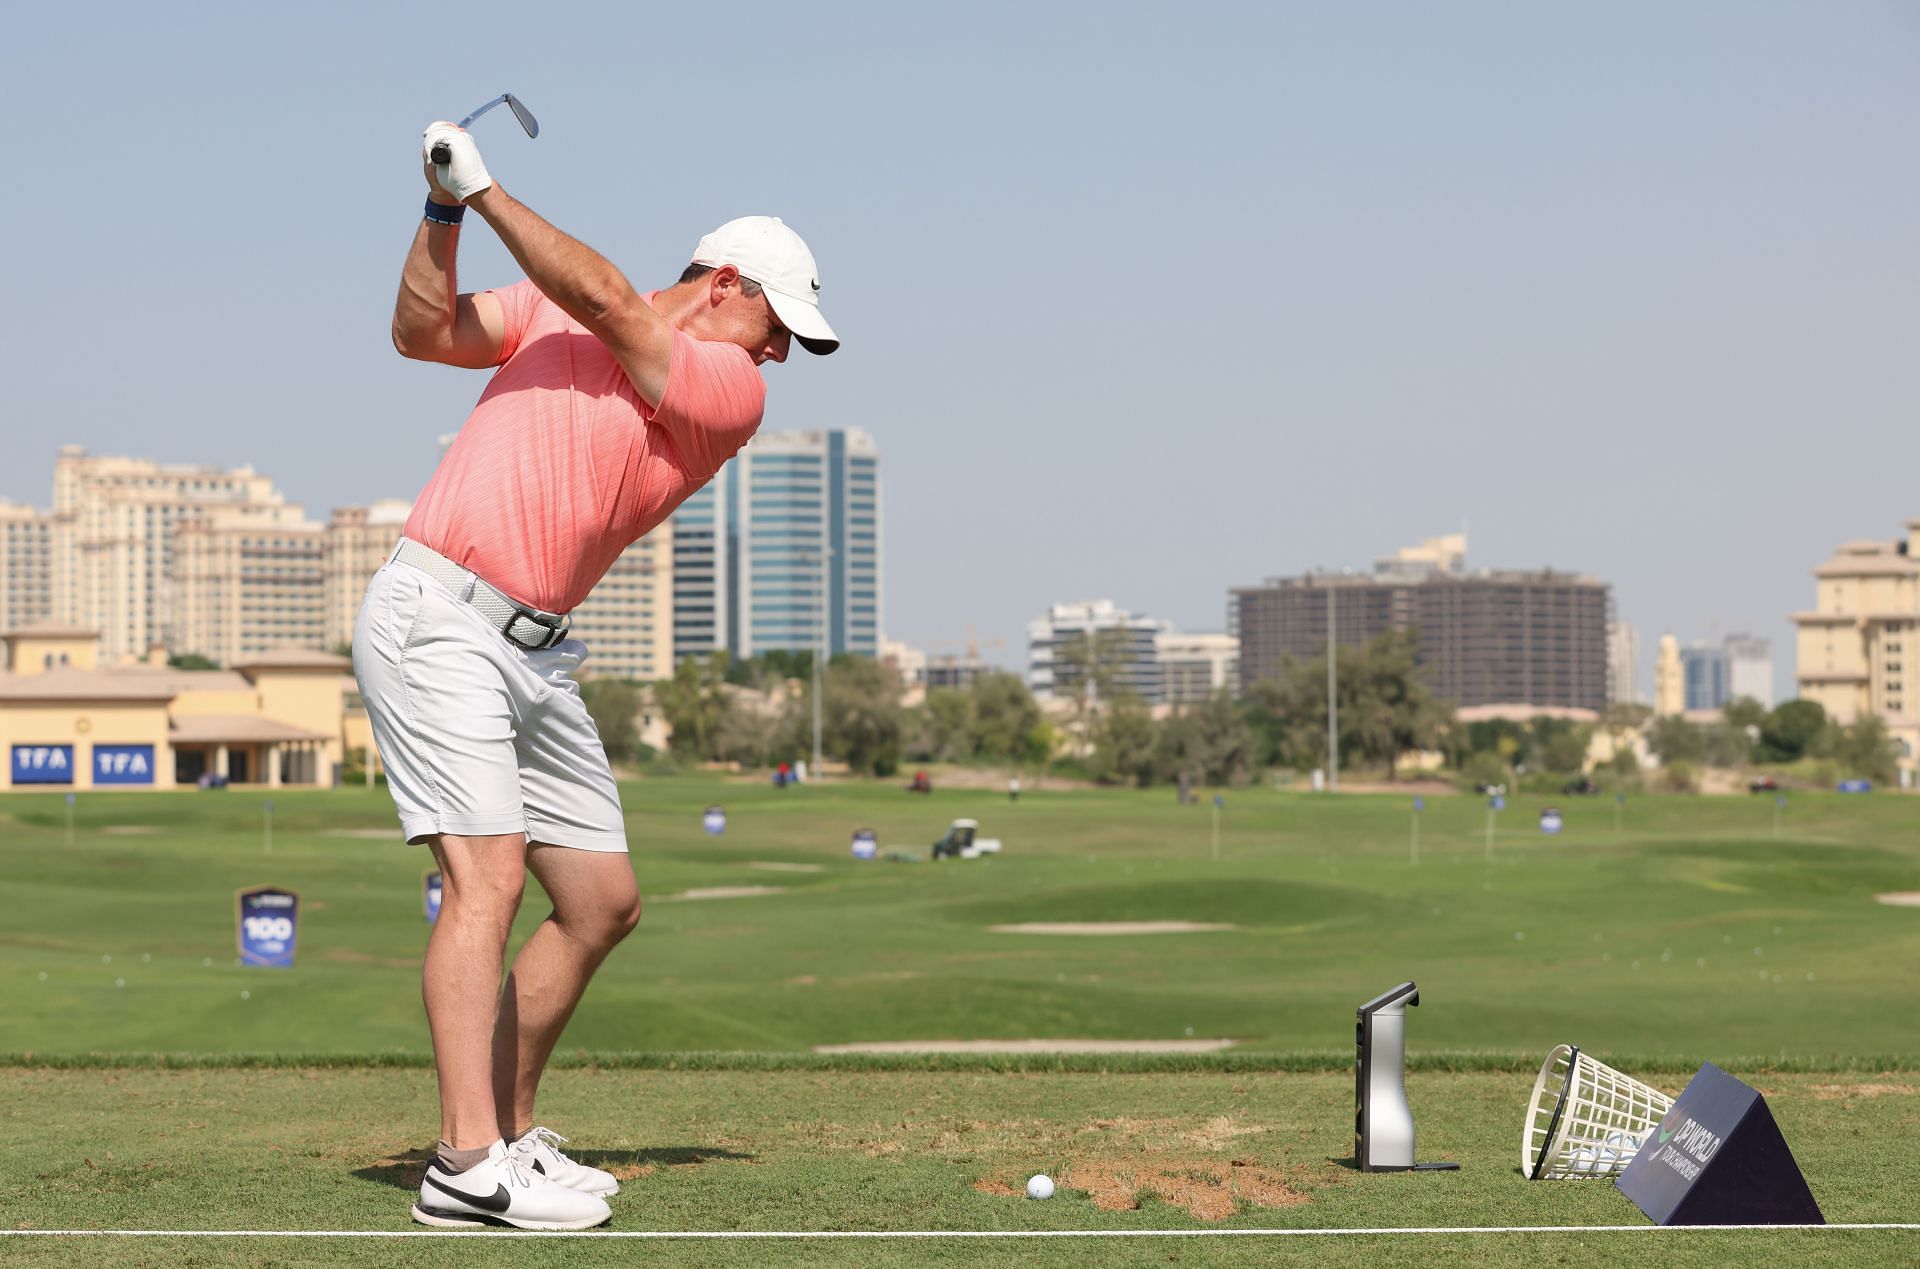 Rory McIlroy at the DP World Tour Championship - Previews (Image via Luke Walker/Getty Images)